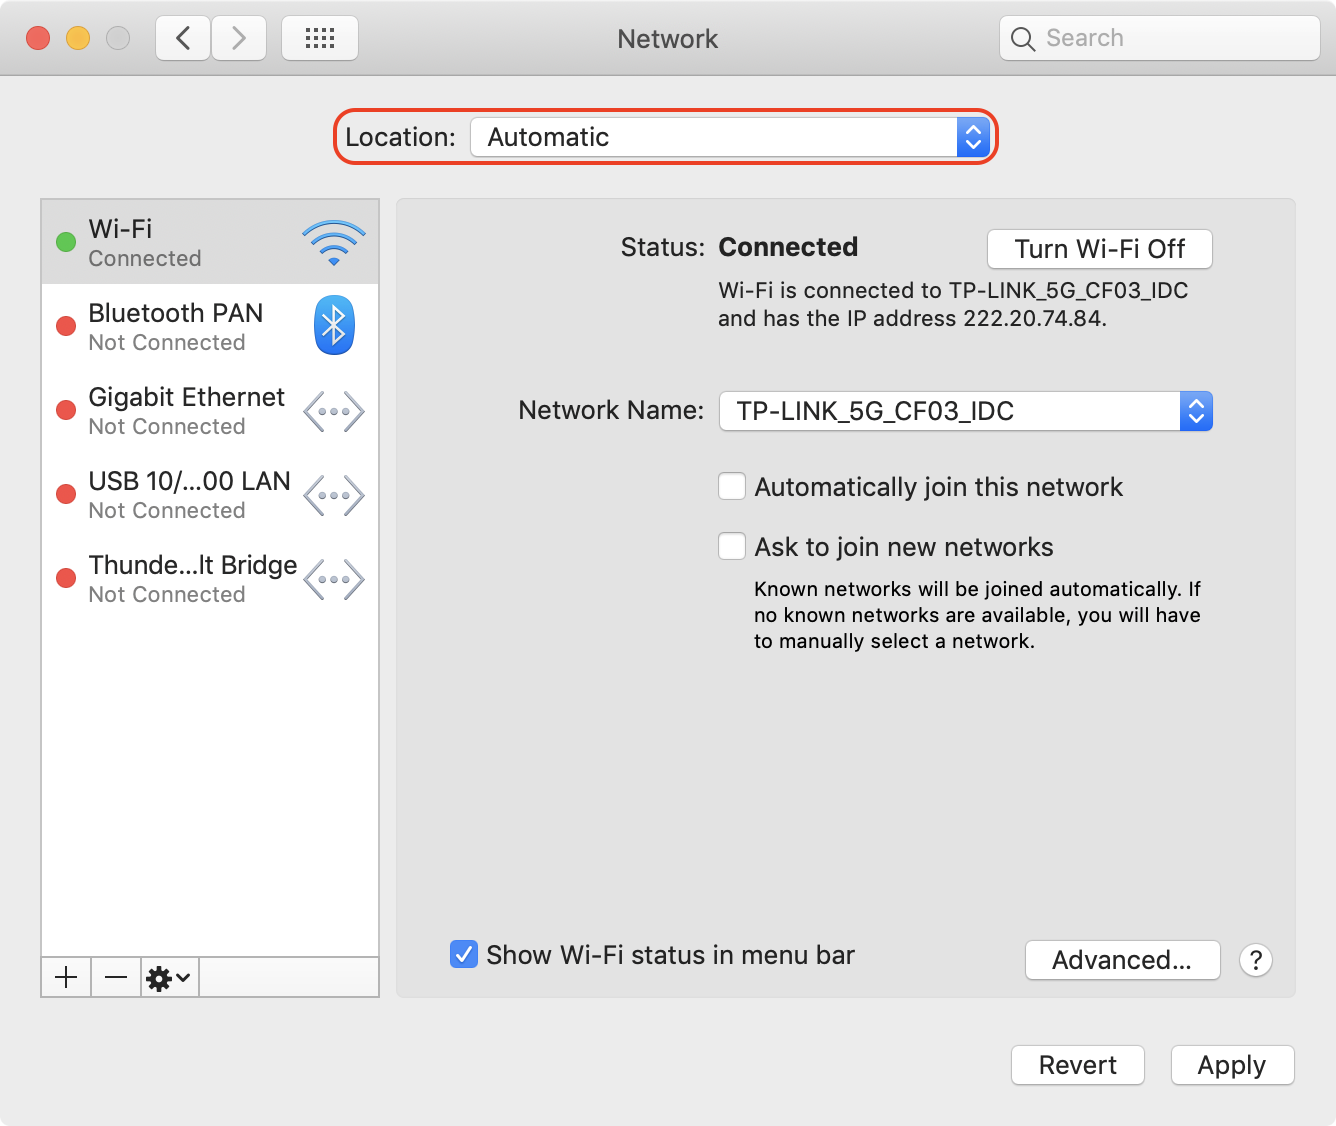 Network settings for different locations